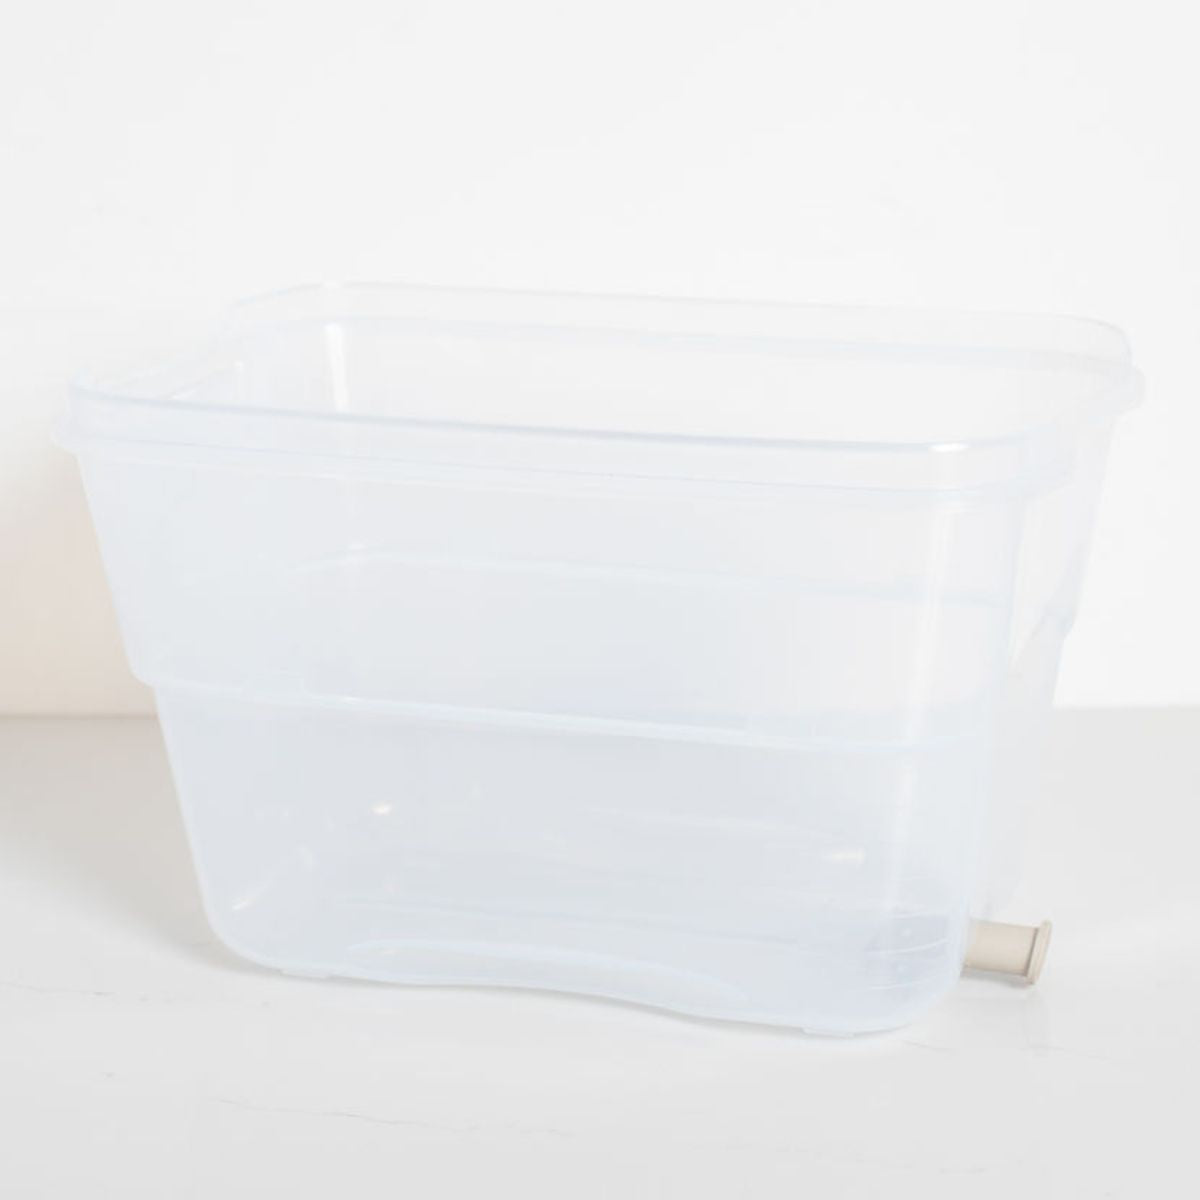 Spare Outer Container - Strucket, color_Clear, plugColor_Sand